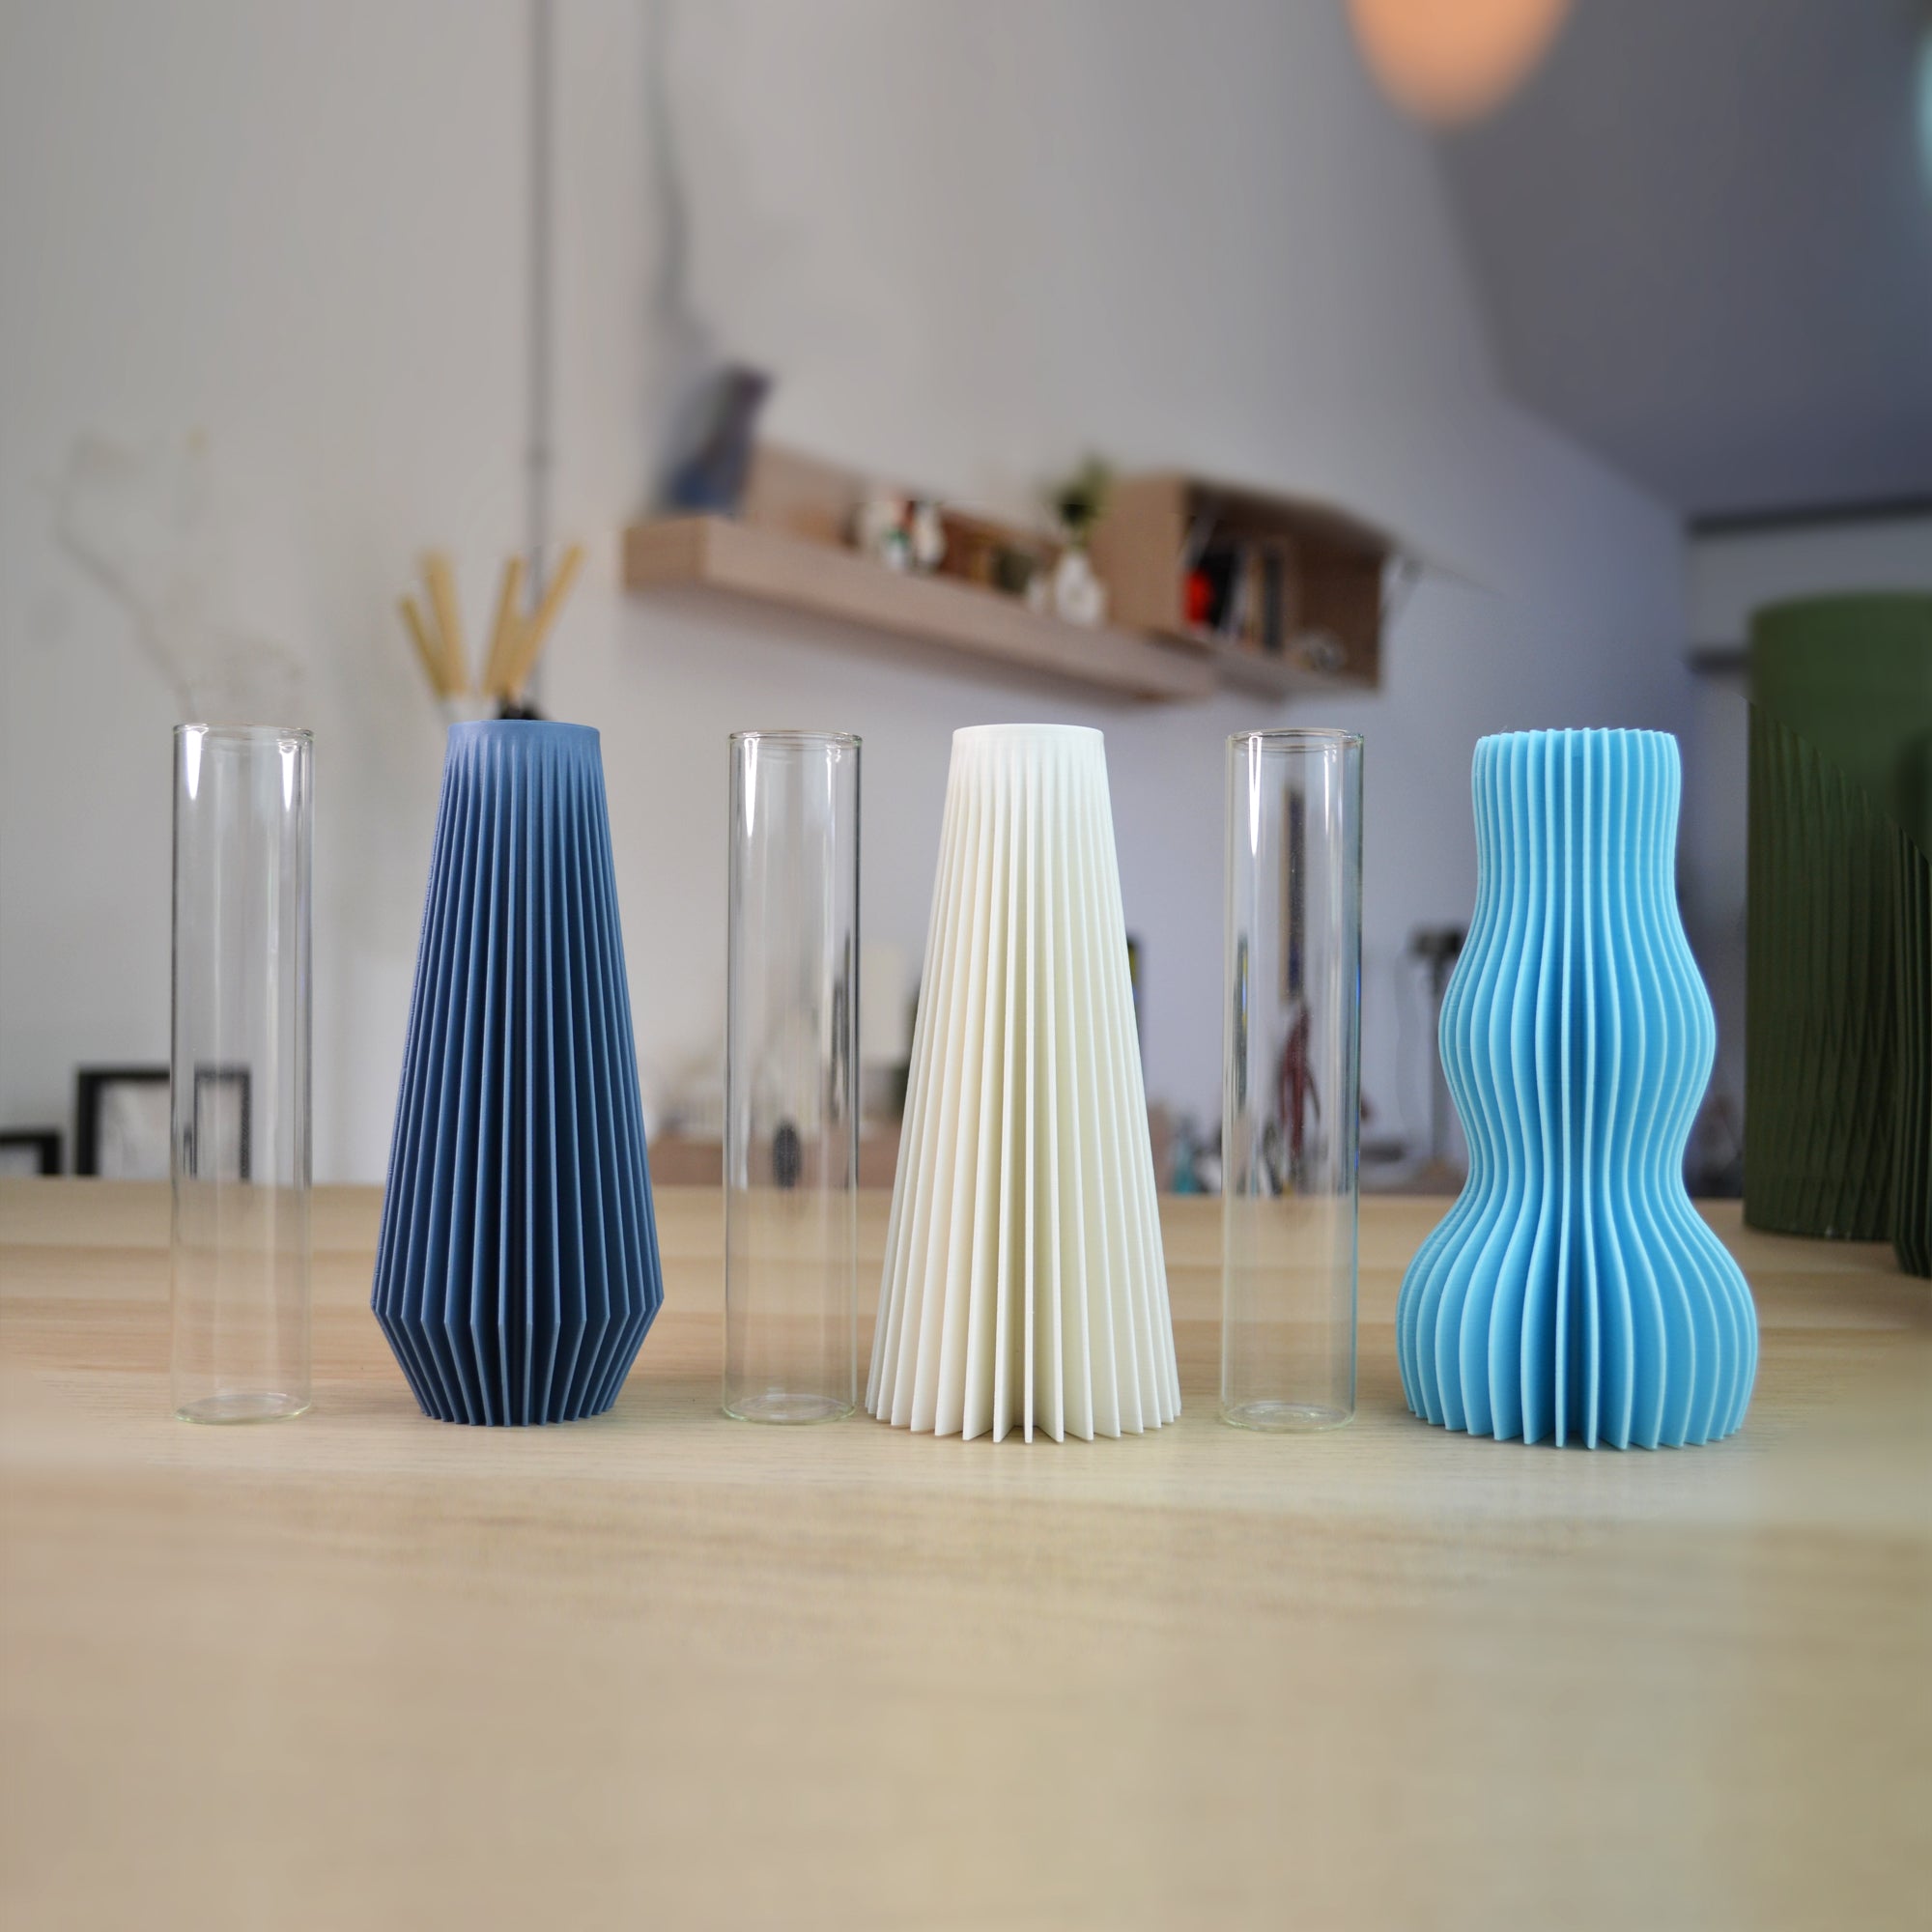 Tris Design Vases: An Oasis of Creativity and 3D Printing